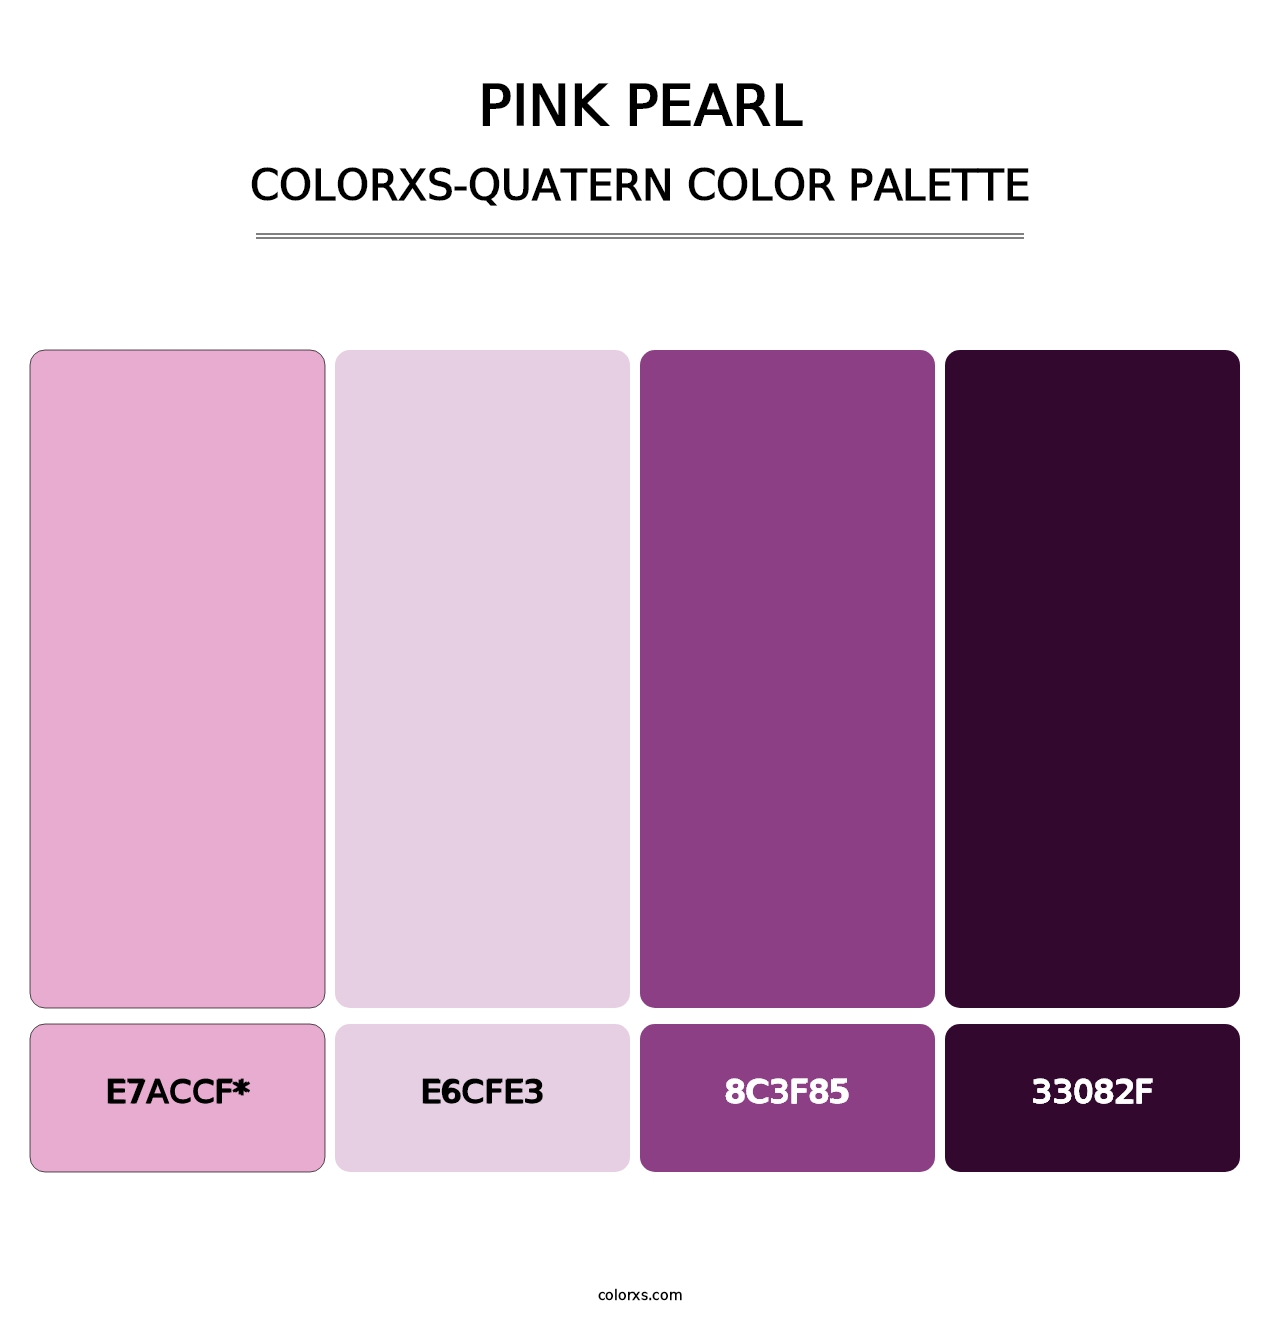 Pink Pearl - Colorxs Quatern Palette